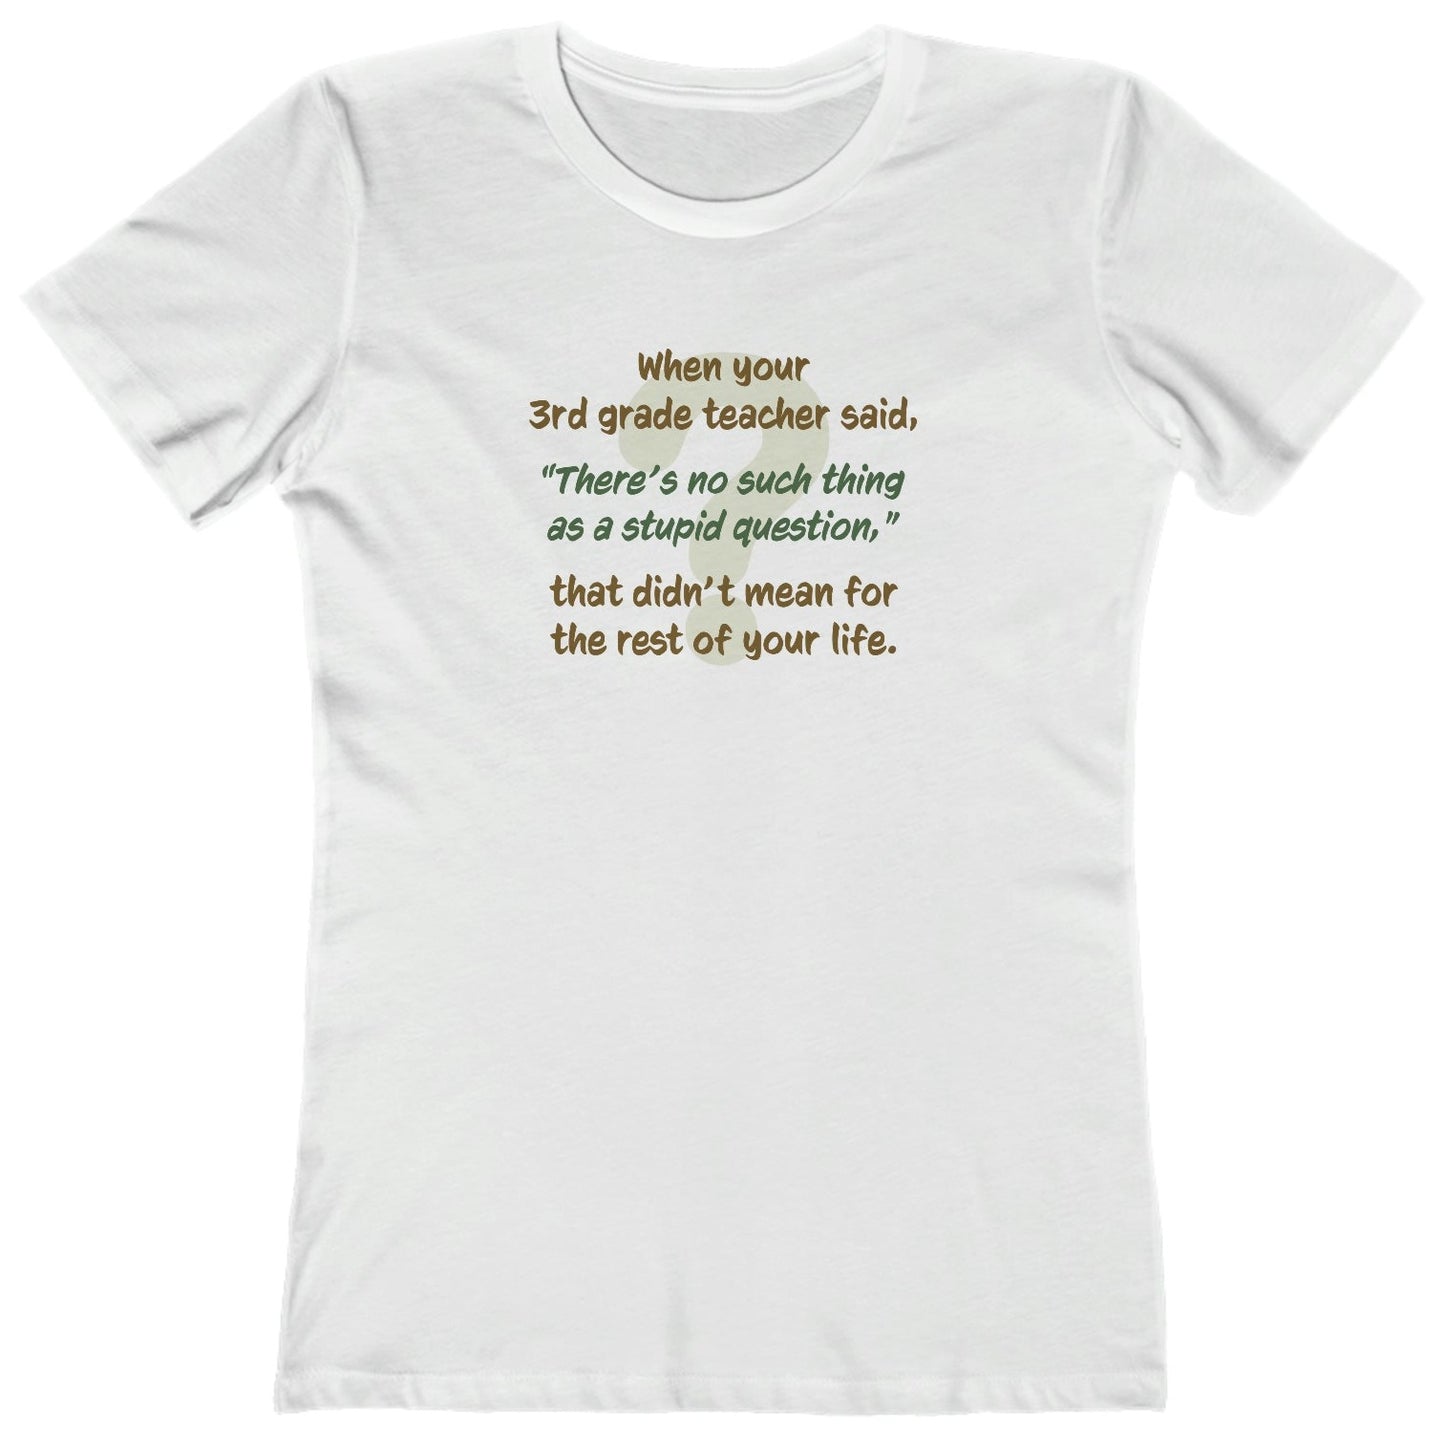 No Such Thing as a Stupid Question - Women's T-Shirt